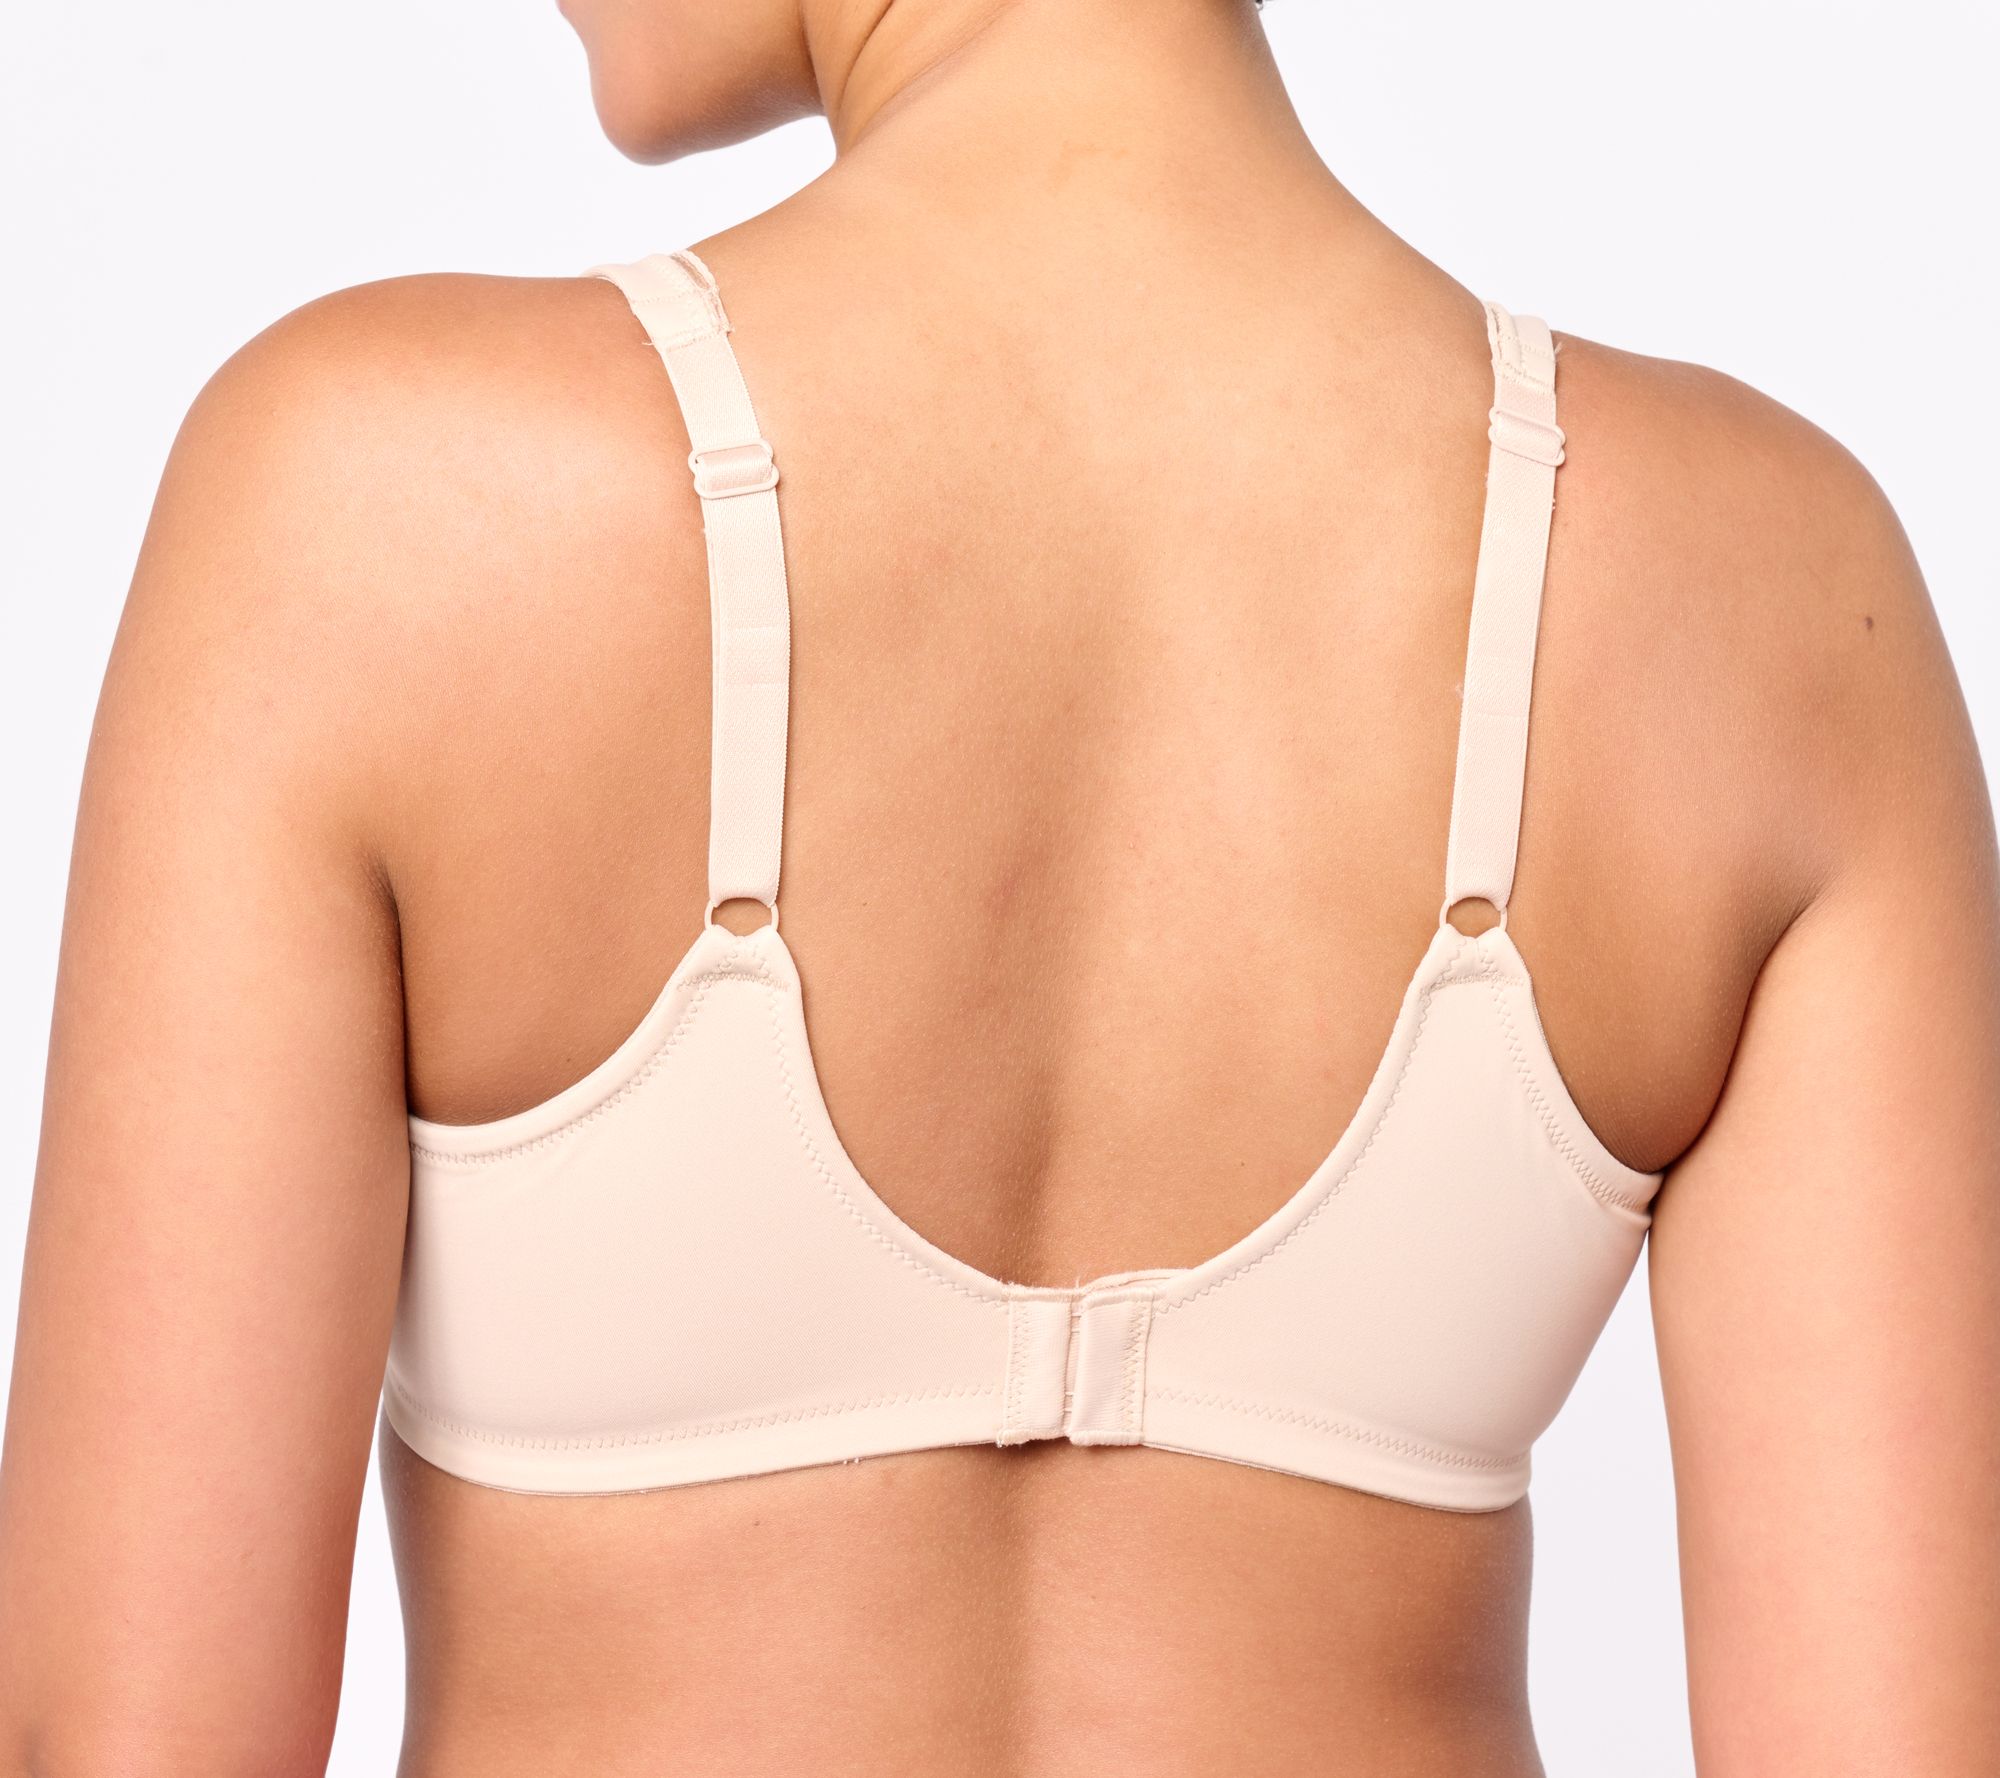 Breezies Smoothing Support Underwire Minimizer Bra